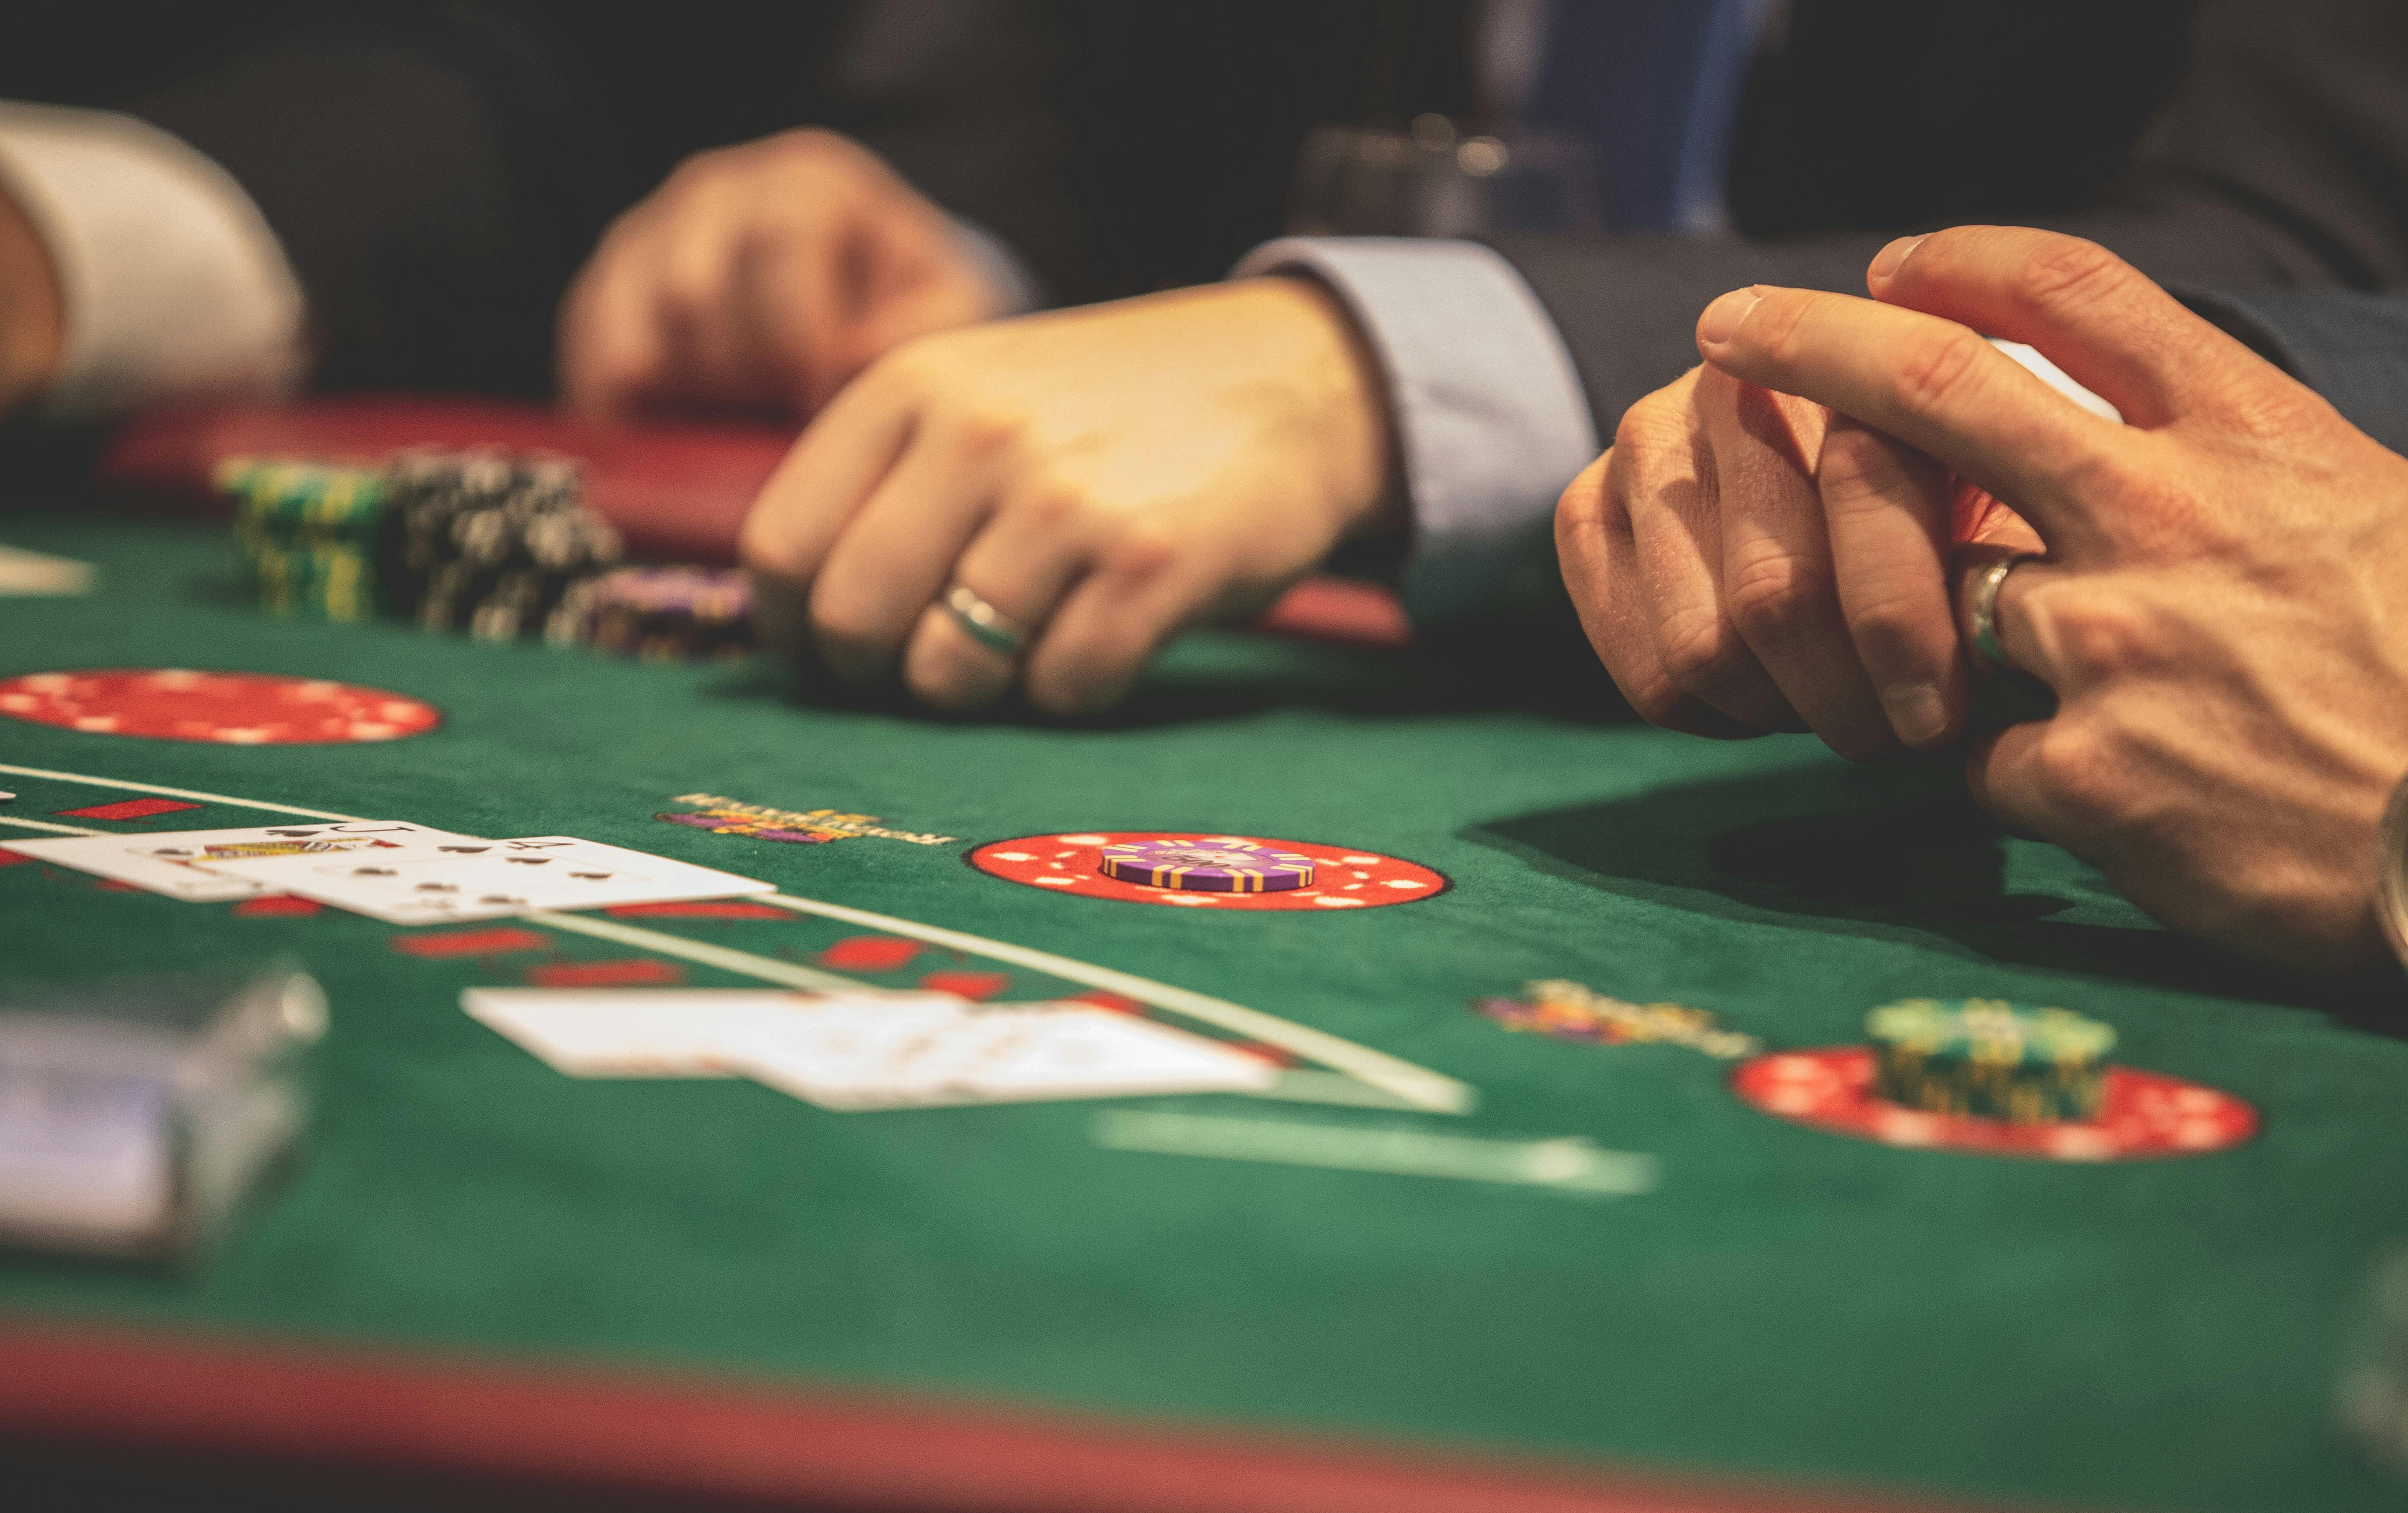 4 Things to Know About Gambling in Singapore